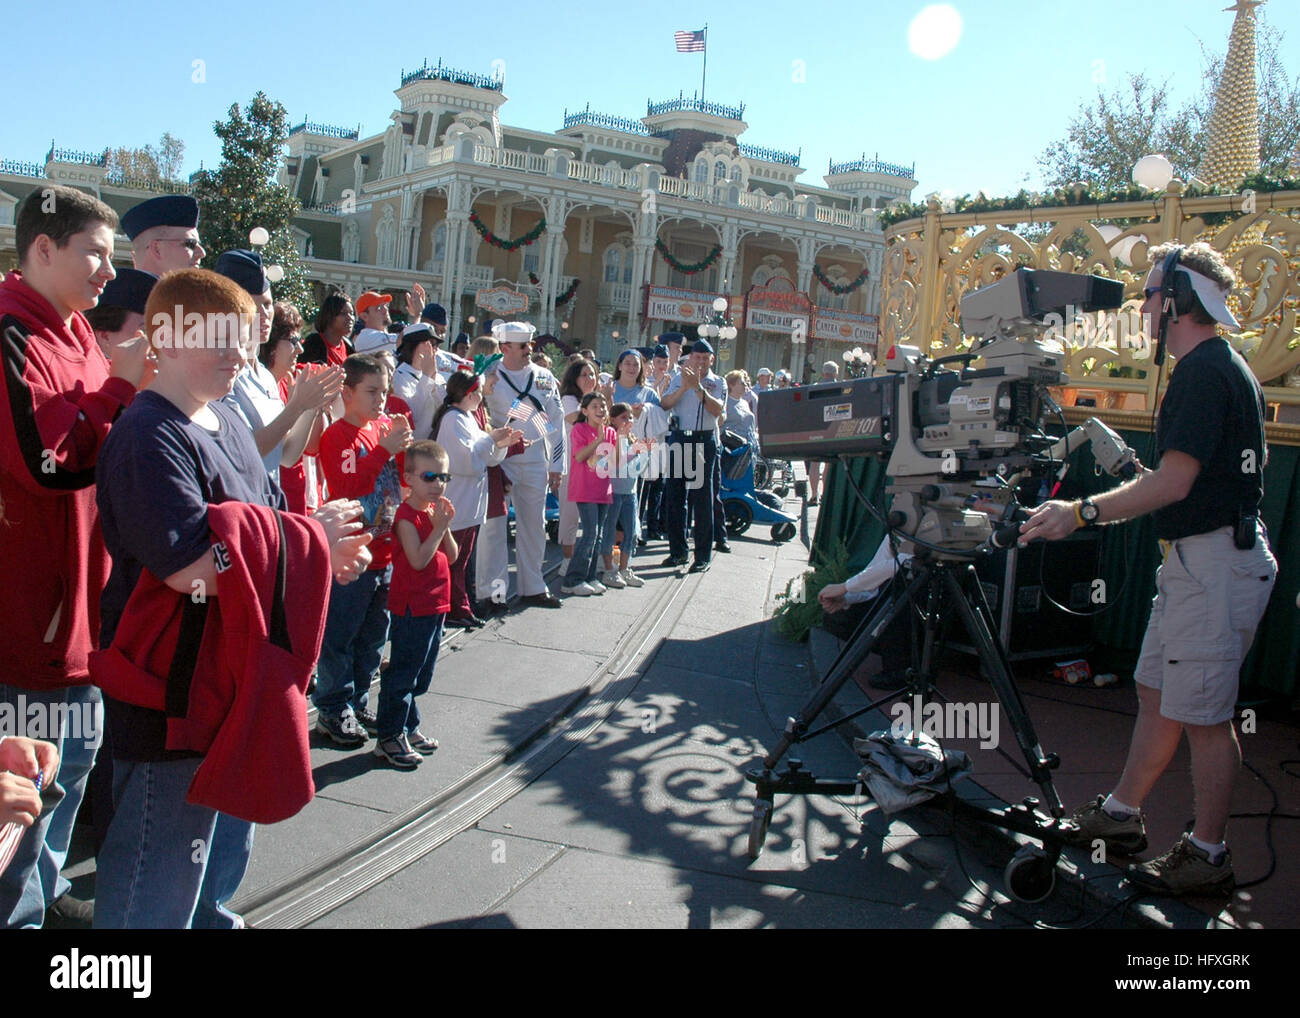 051204-N-8102J-004 Orlando, Fla. (Dec. 4, 2005) - Members of the Armed Forces and their families participate in the taping of the 2005 Walt Disney World Christmas Day Parade held at the Magic Kingdom in Orlando, Fla. U.S. Navy photo by Photographer's Mate 1st Class Toiete Jackson (RELEASED) US Navy 051204-N-8102J-004 Members of the Armed Forces and their families participate in the taping of the 2005 Walt Disney World Christmas Day Parade held at the Magic Kingdom in Orlando, Fla Stock Photo